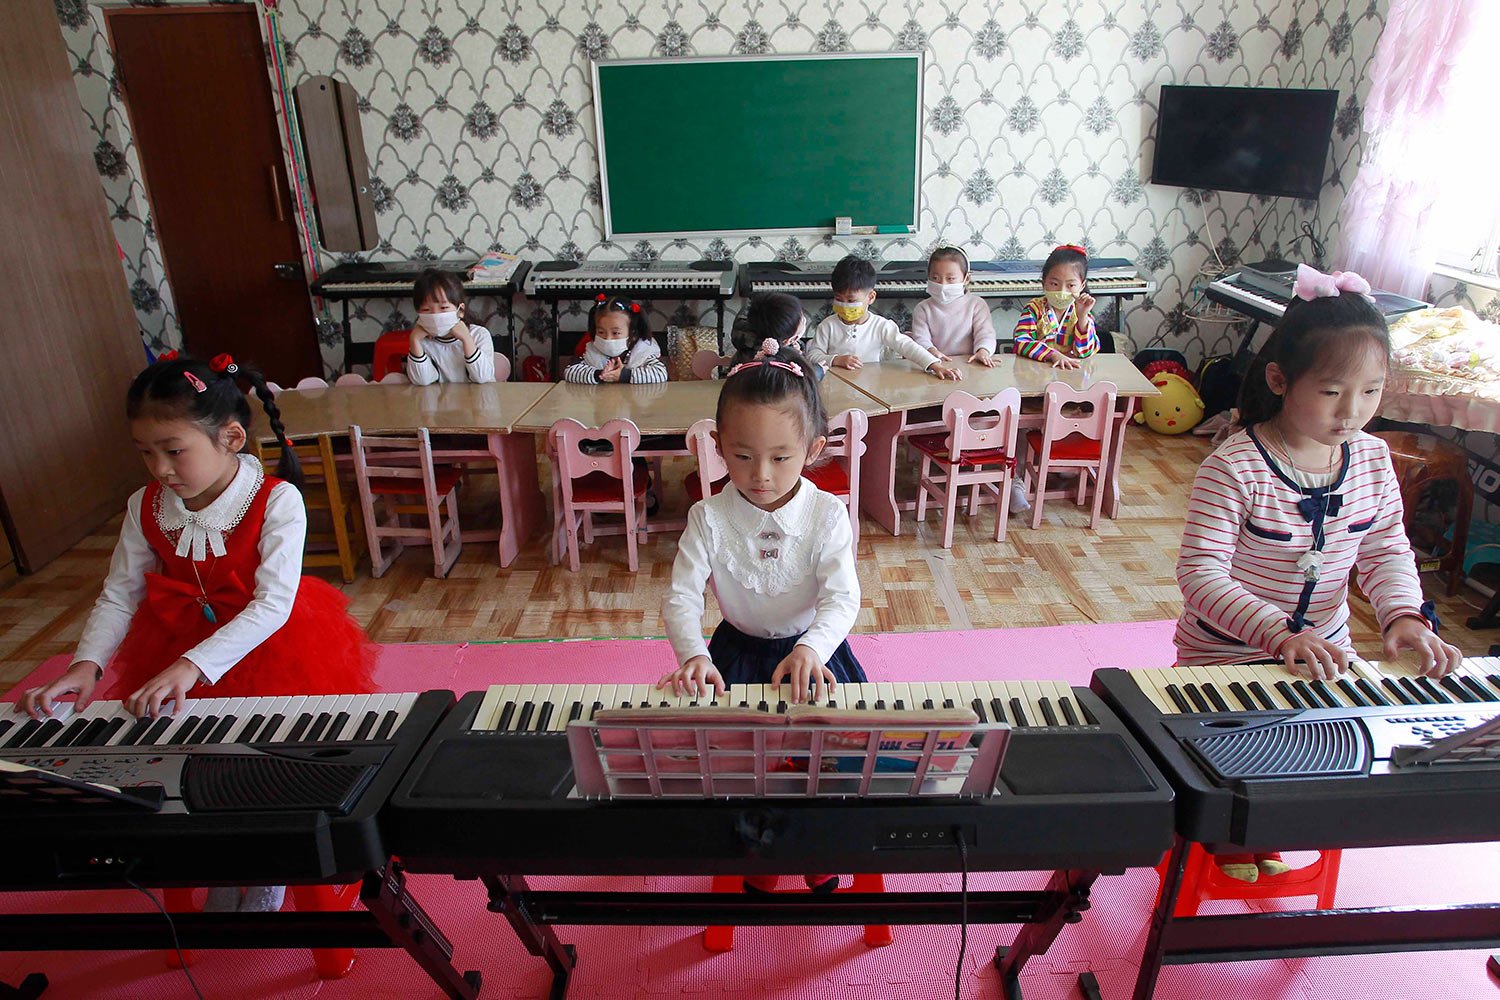  Young girls practice piano at the Ryonmot Kindergarten in the Sosong District of Pyongyang, North Korea, Monday, Oct. 17, 2022. (AP Photo/Cha Song Ho) 